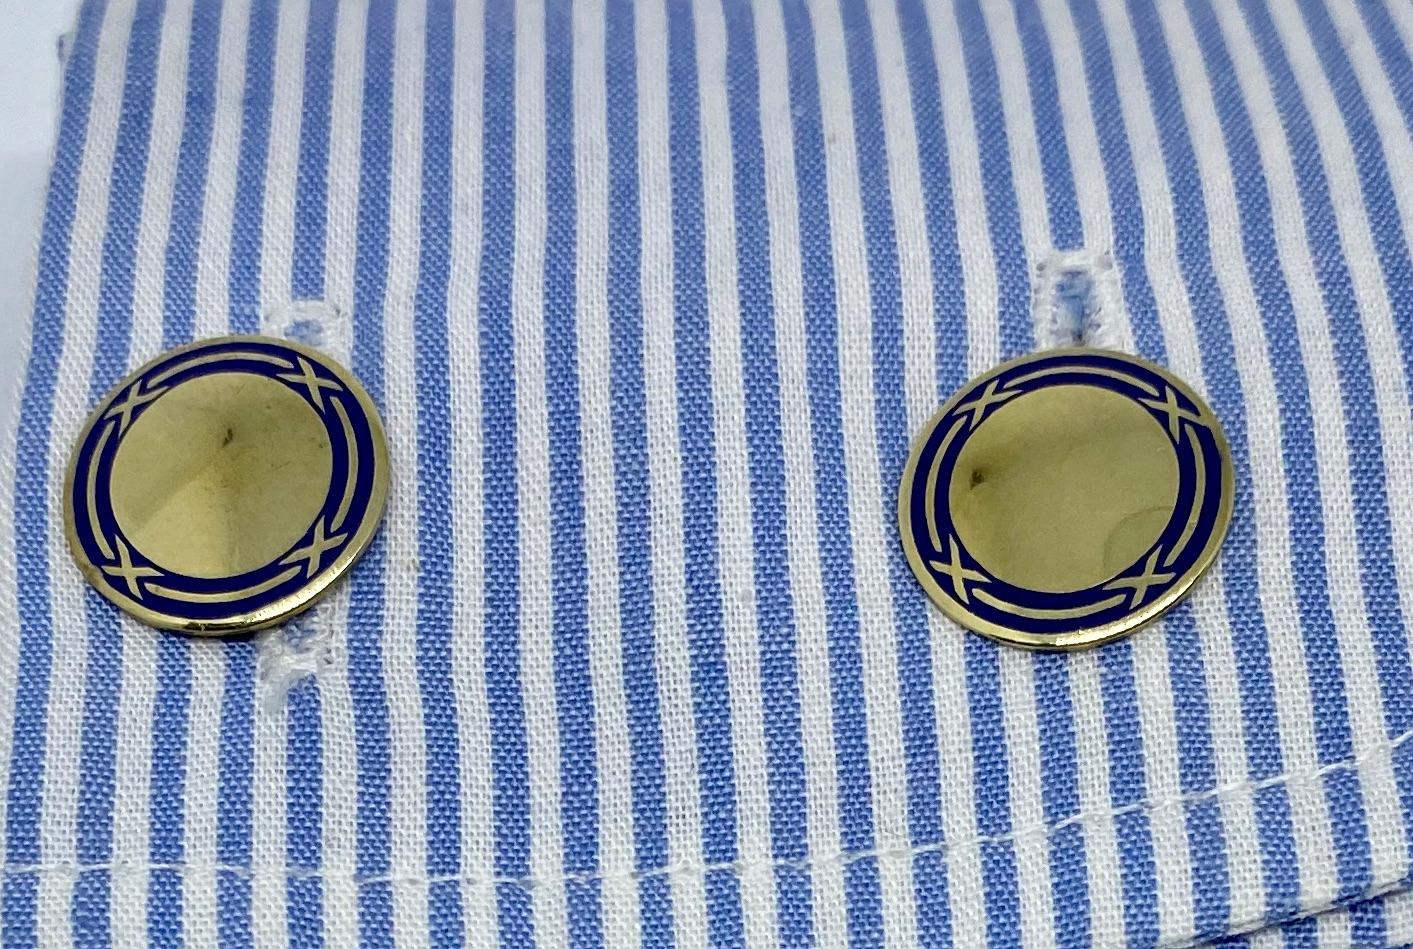 Art Deco Cufflinks in Yellow Gold and Blue Enamel by Sansbury & Nellis For Sale 2